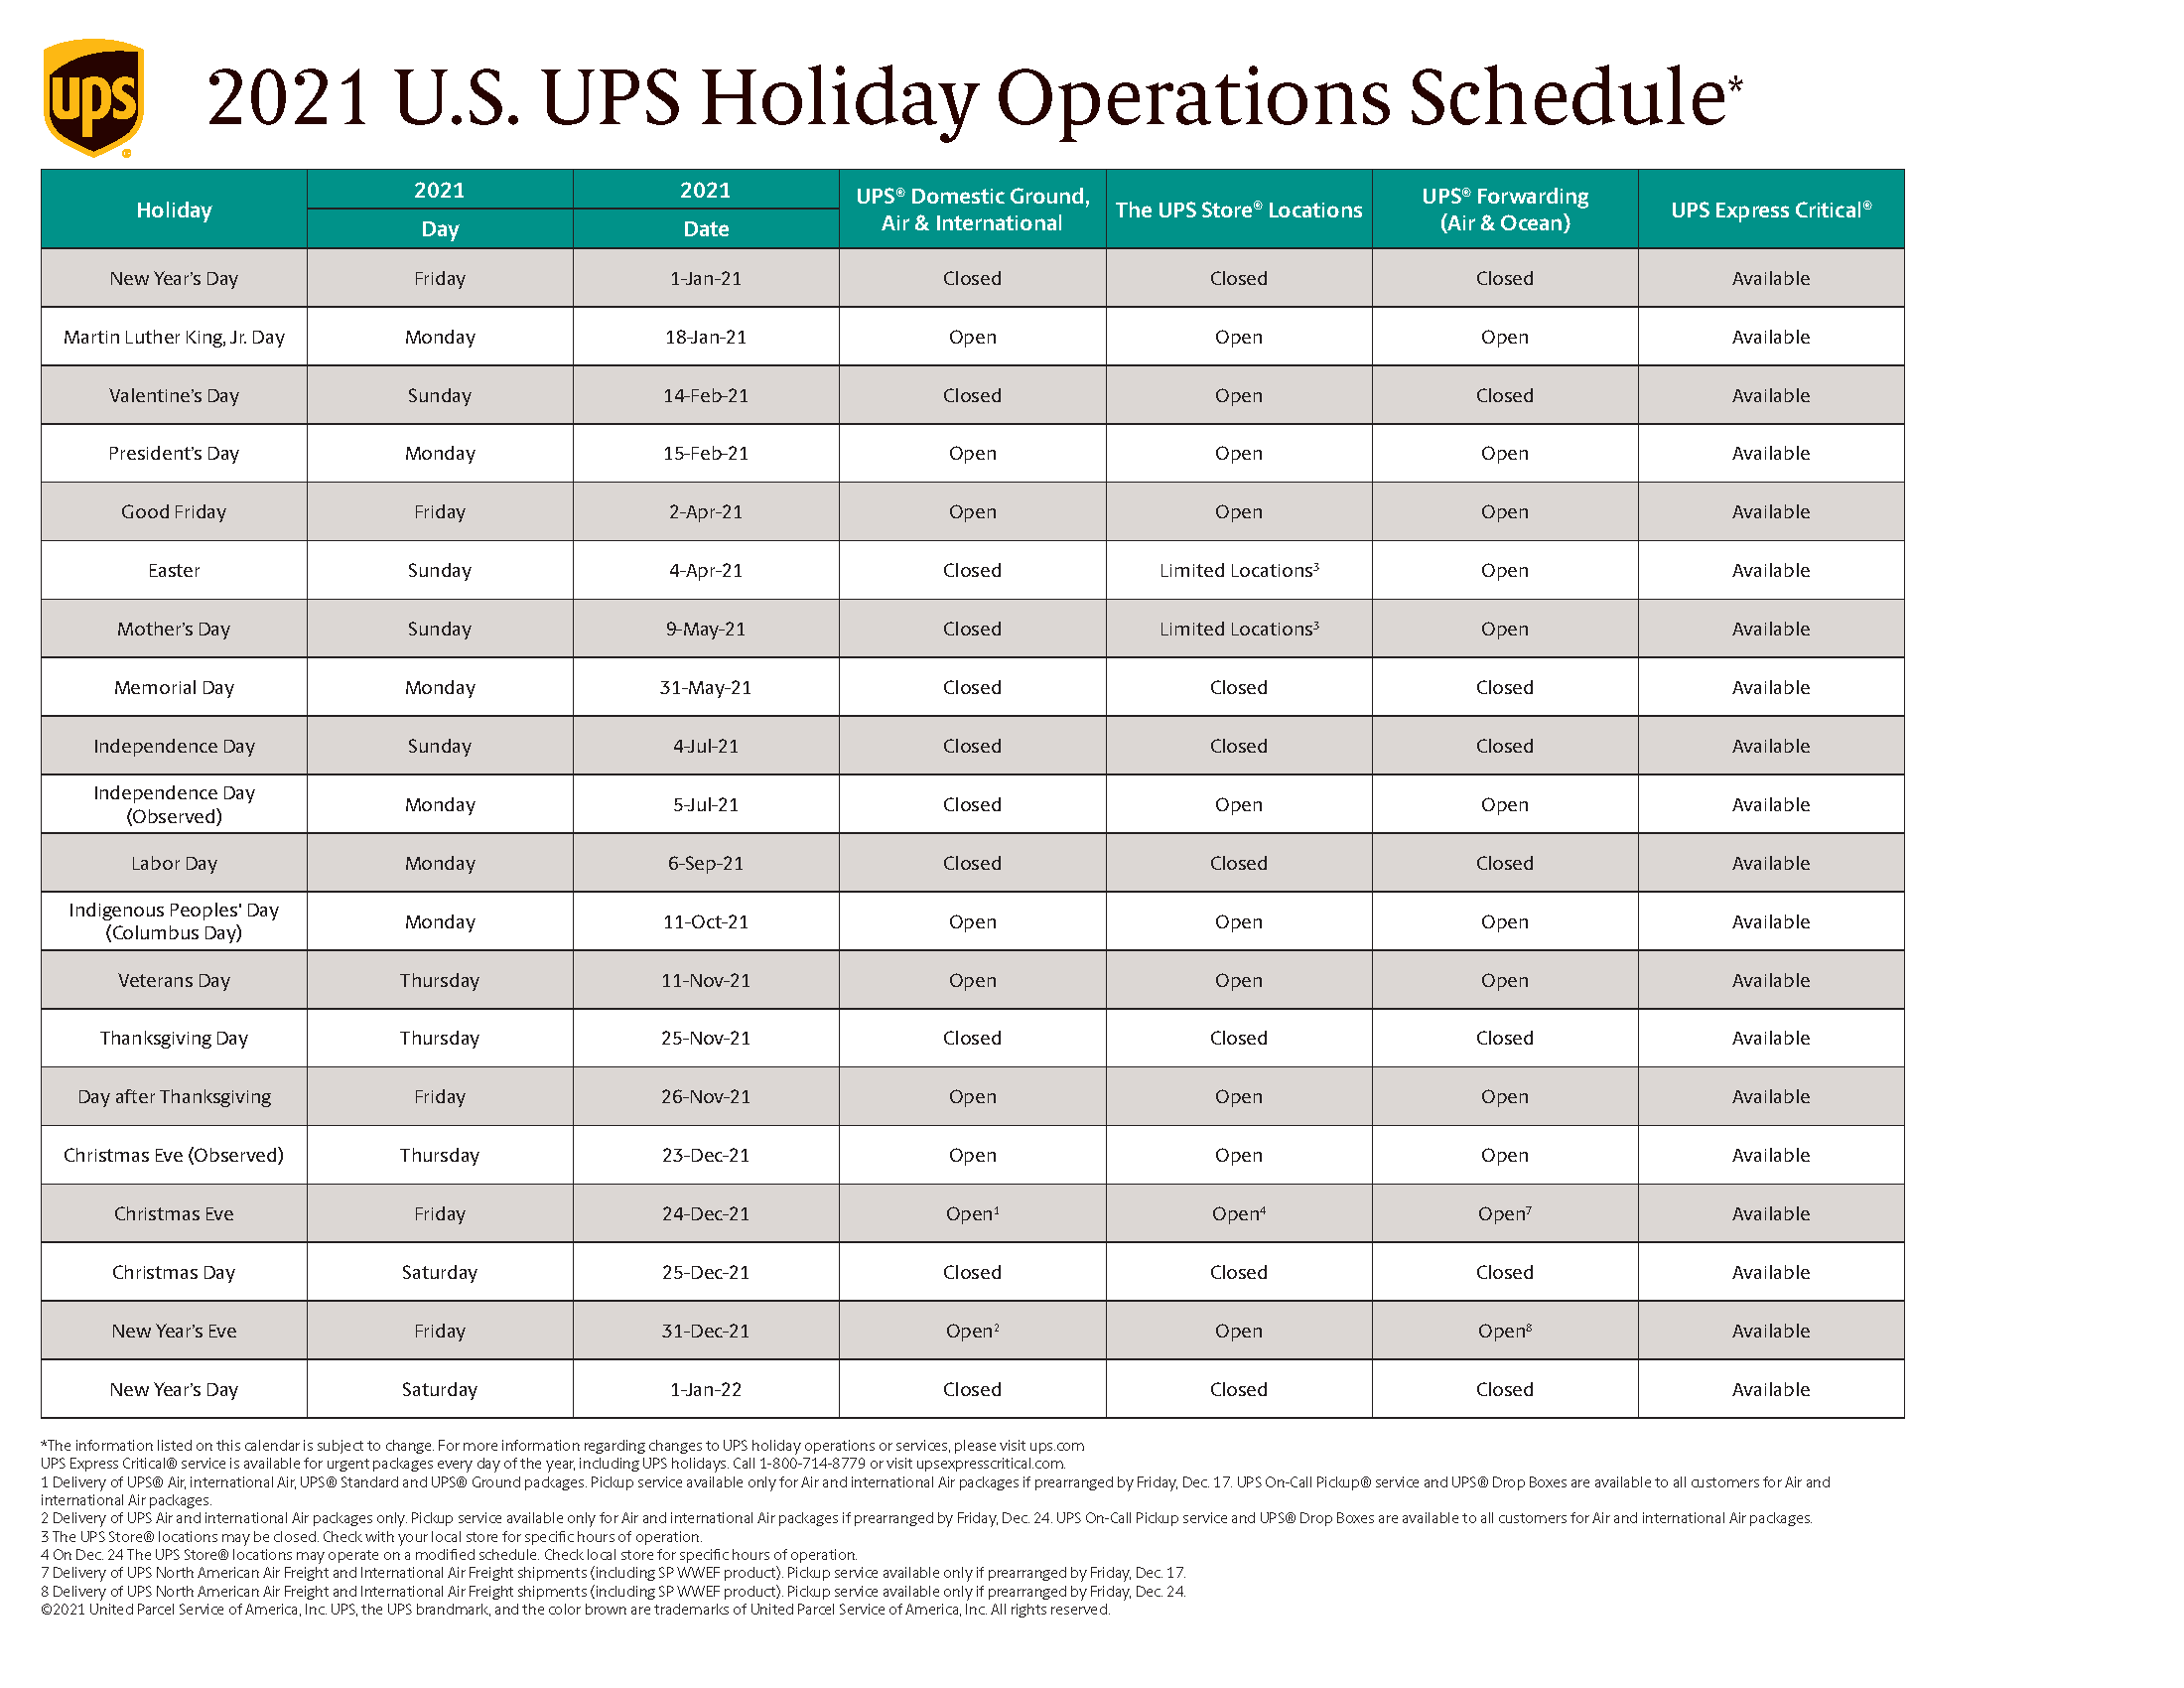 2021 UPS Holiday Schedule The Protein Store